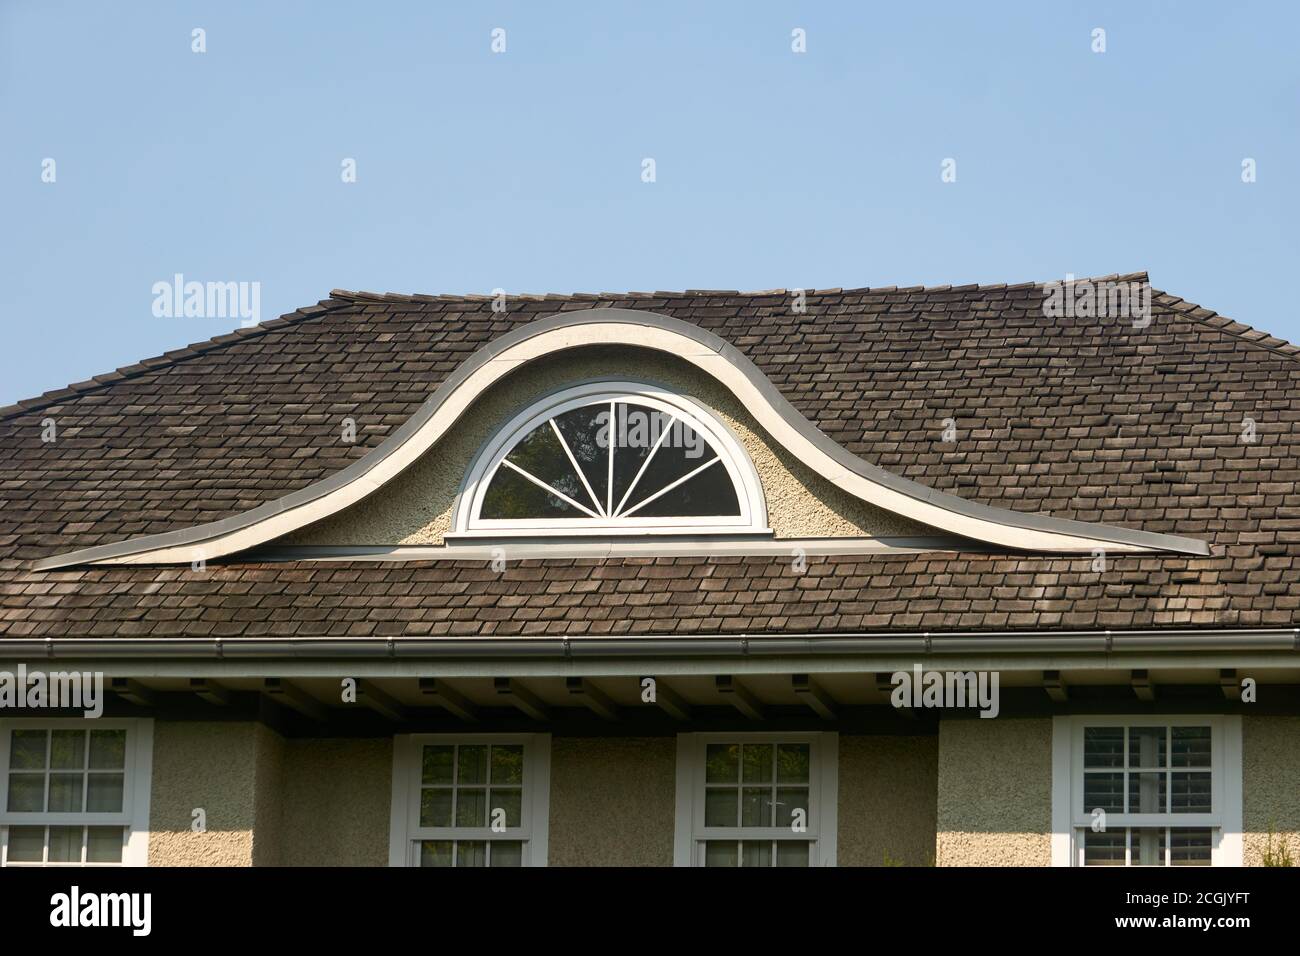 Semicircular arched attic window or eyebrow dormer in a cedar shake roof of a house Stock Photo